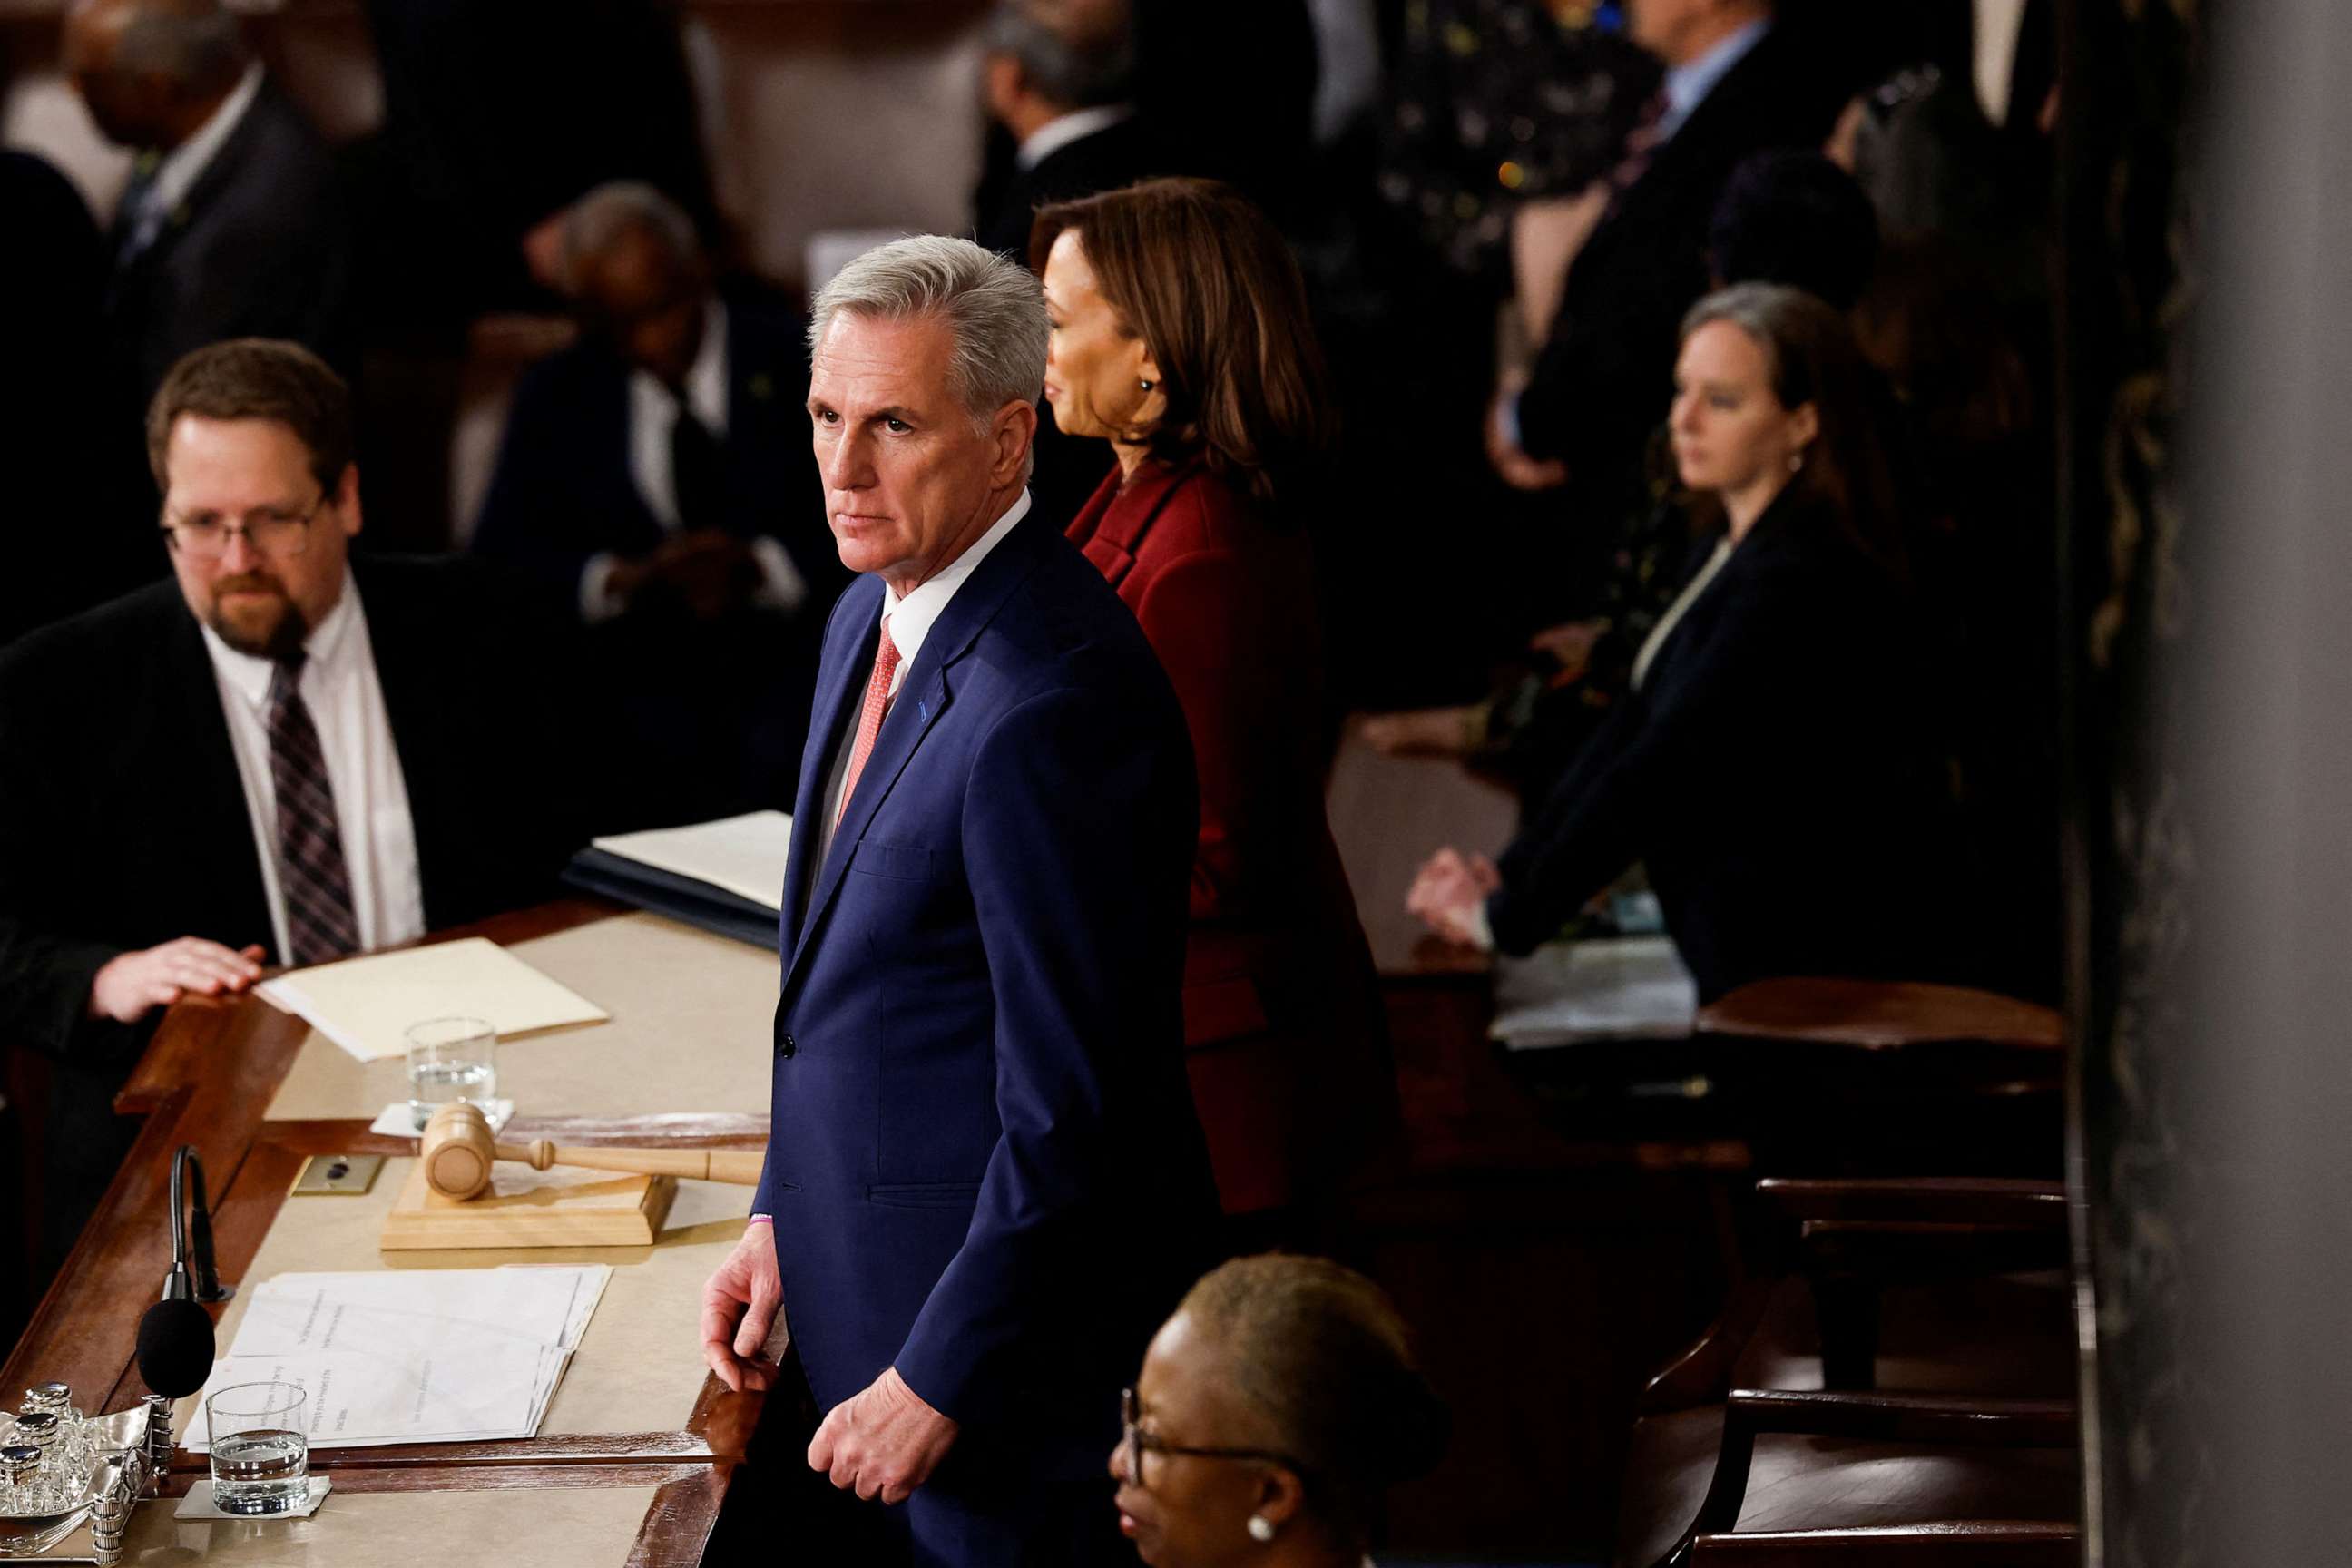 PHOTO: House Speaker Kevin McCarthy attends President Joe Biden's State of the Union address at the Capitol in Washington DC, Feb. 7, 2023.